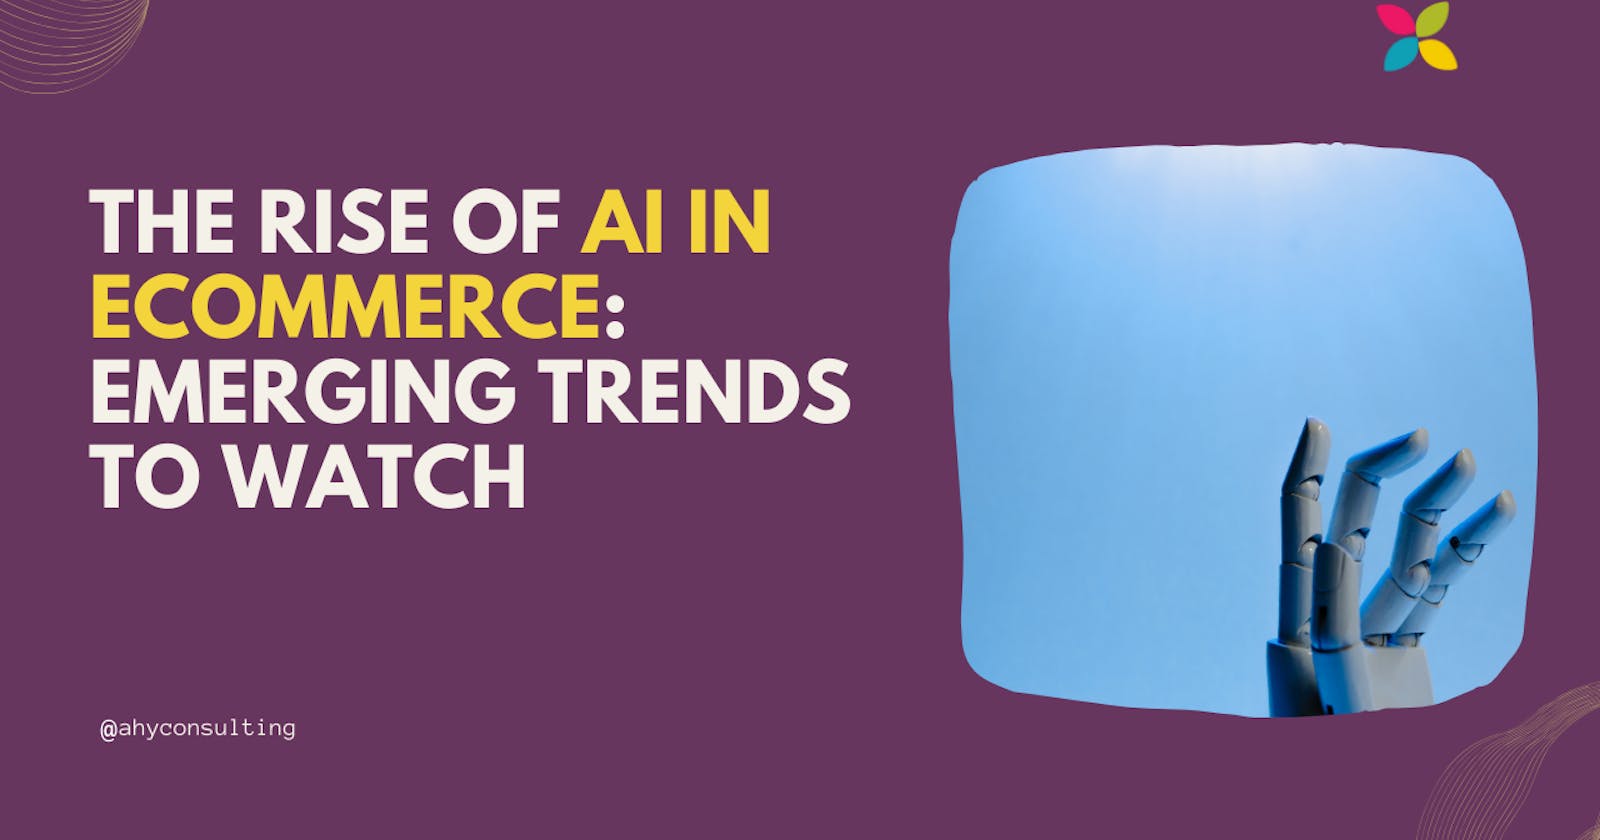 The Rise of AI in eCommerce: Emerging Trends to Watch